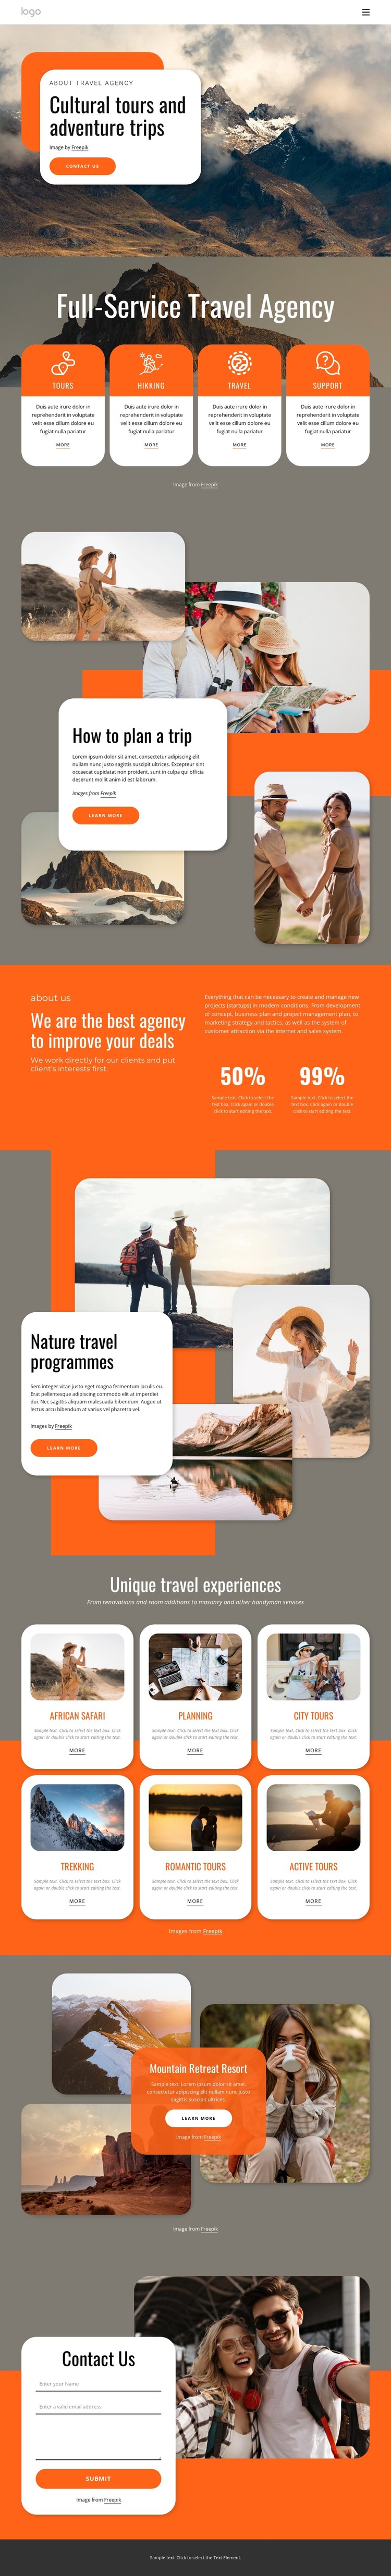 Group travel for all ages Static Site Generator